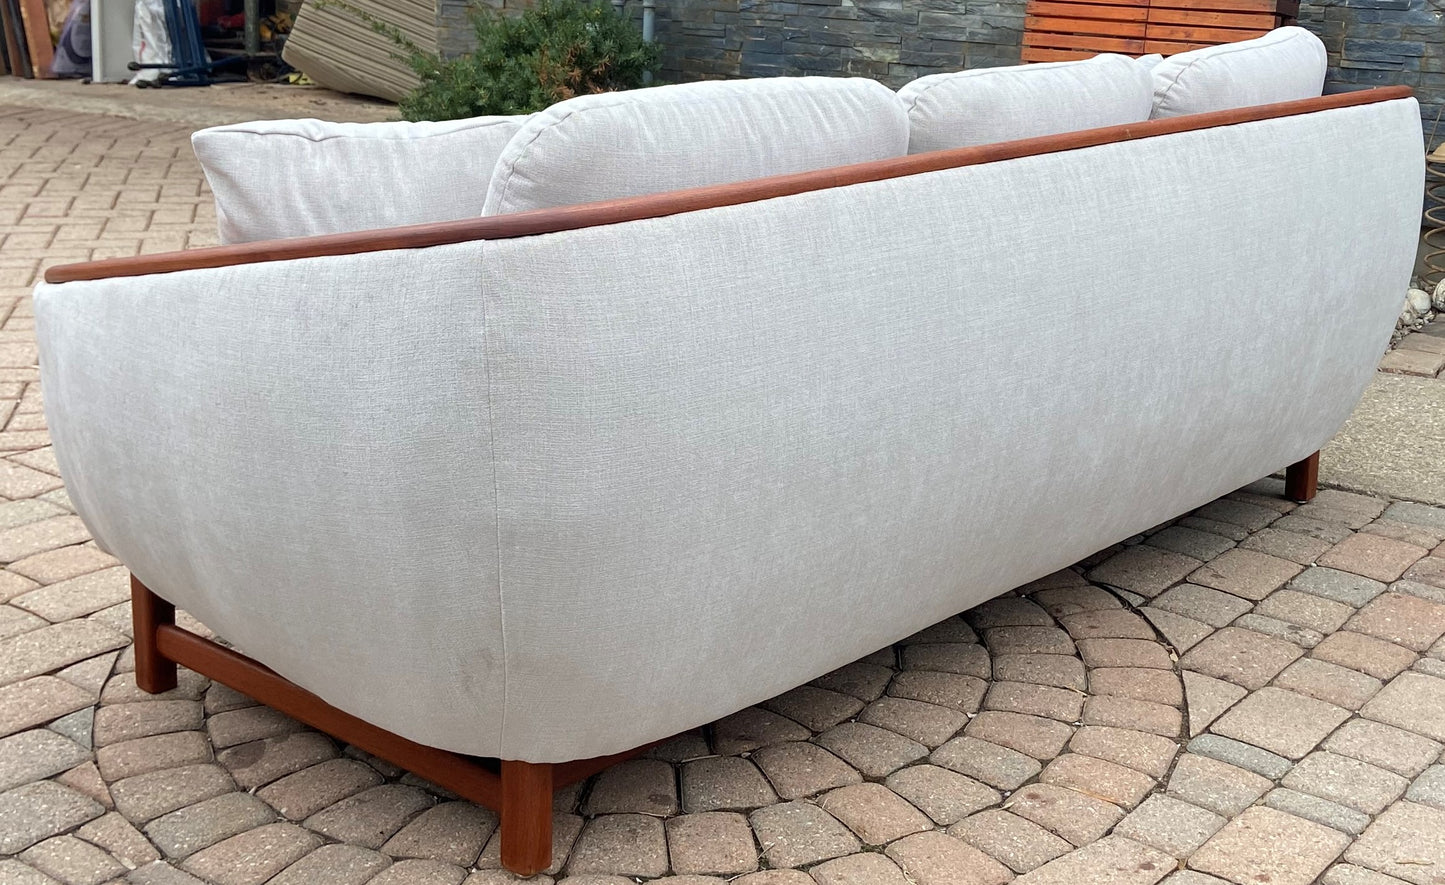 MCM Huber Barrel Back Teak Sofa, REFINISHED & REUPHOLSTERED in KNOLL stain repellent fabric, PERFECT